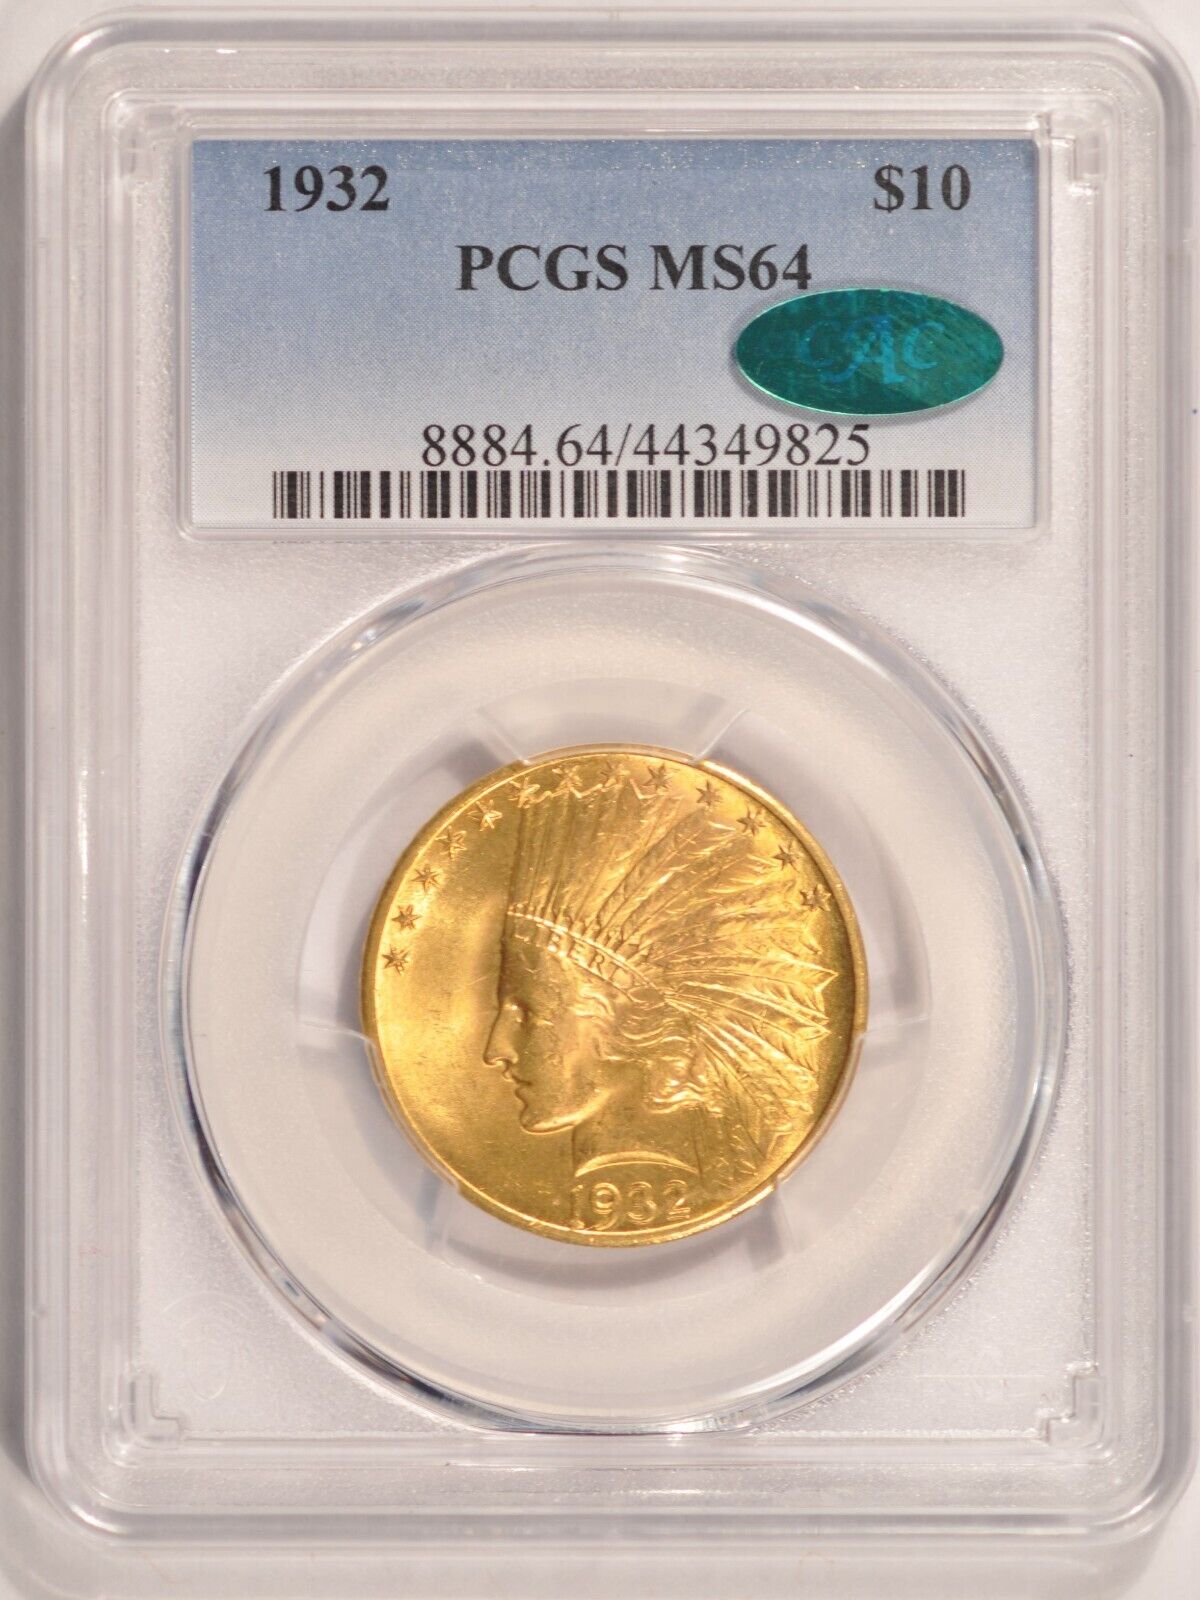 1932 $10 Gold Indian Eagle Coin Pcgs Ms64 Cac Approved Pre-1933 Gold